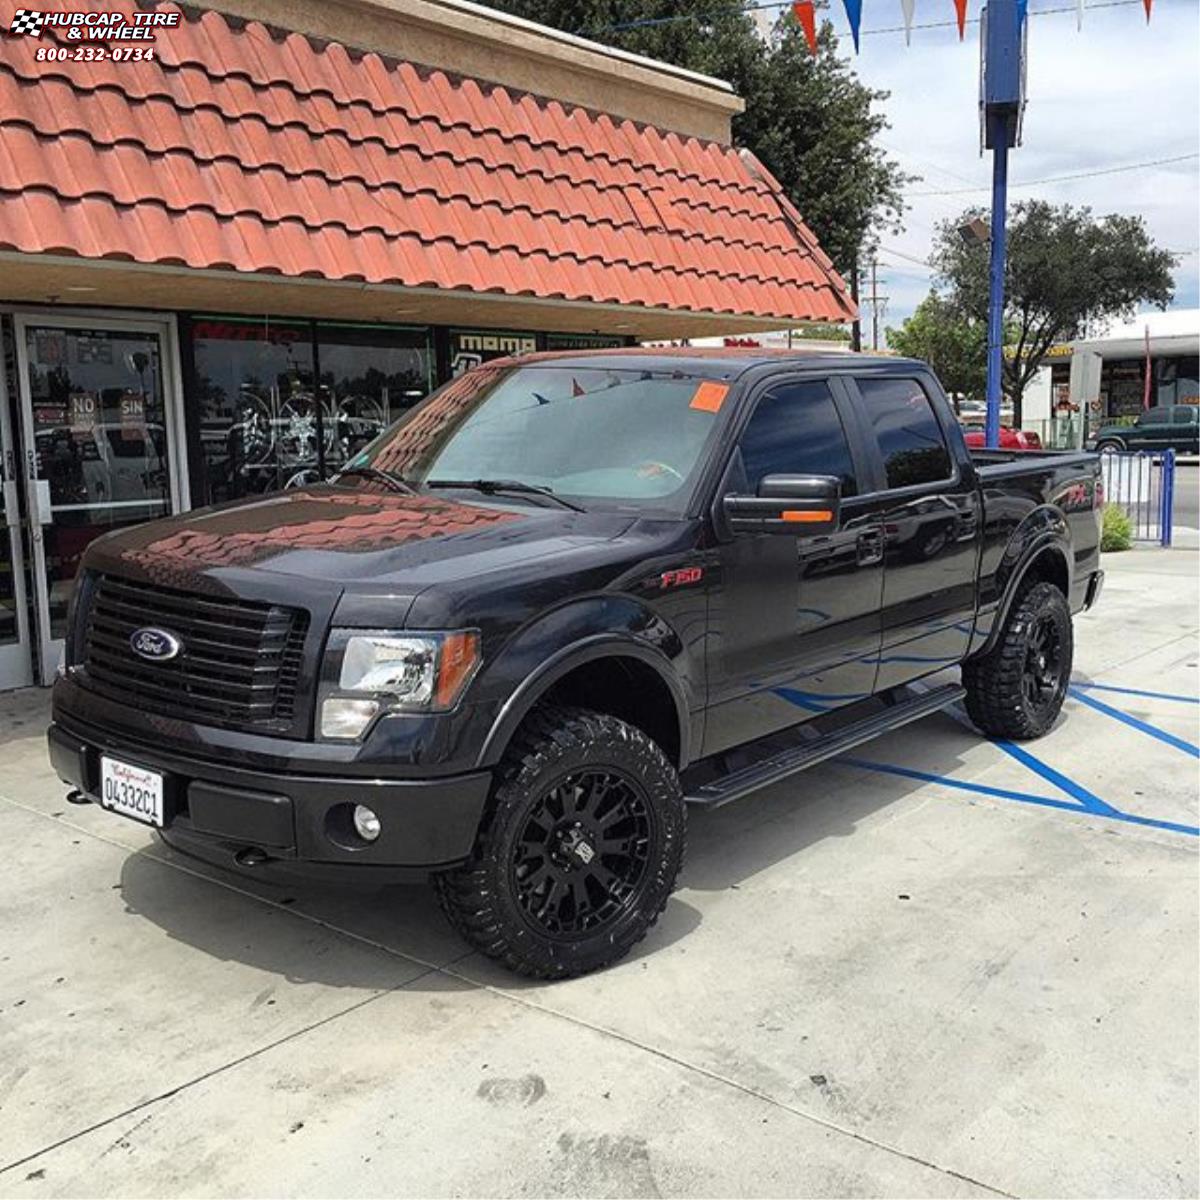 vehicle gallery/ford f 150 xd series xd800 misfit  Matte Black wheels and rims